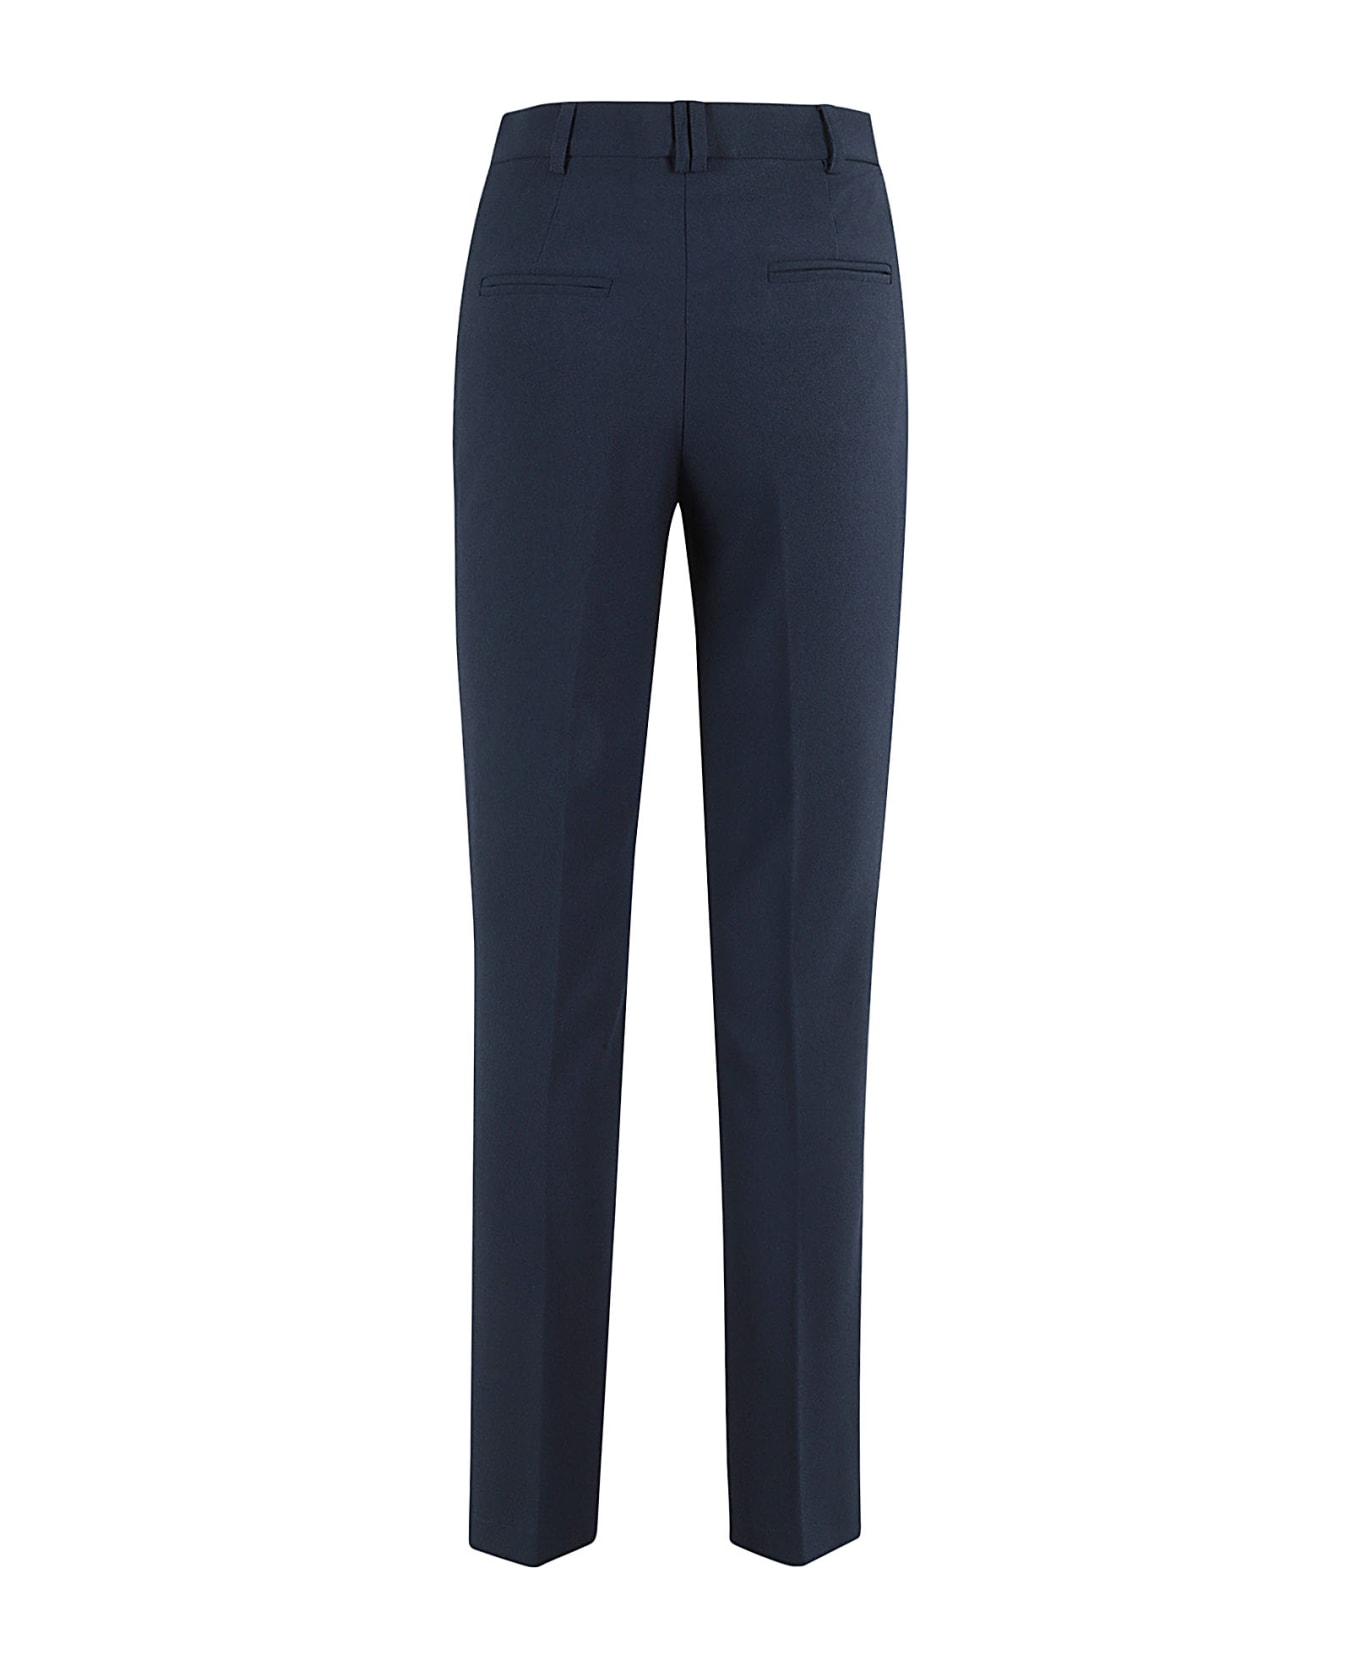 Hebe Studio The Classic Smoking Pant Cady - Navy